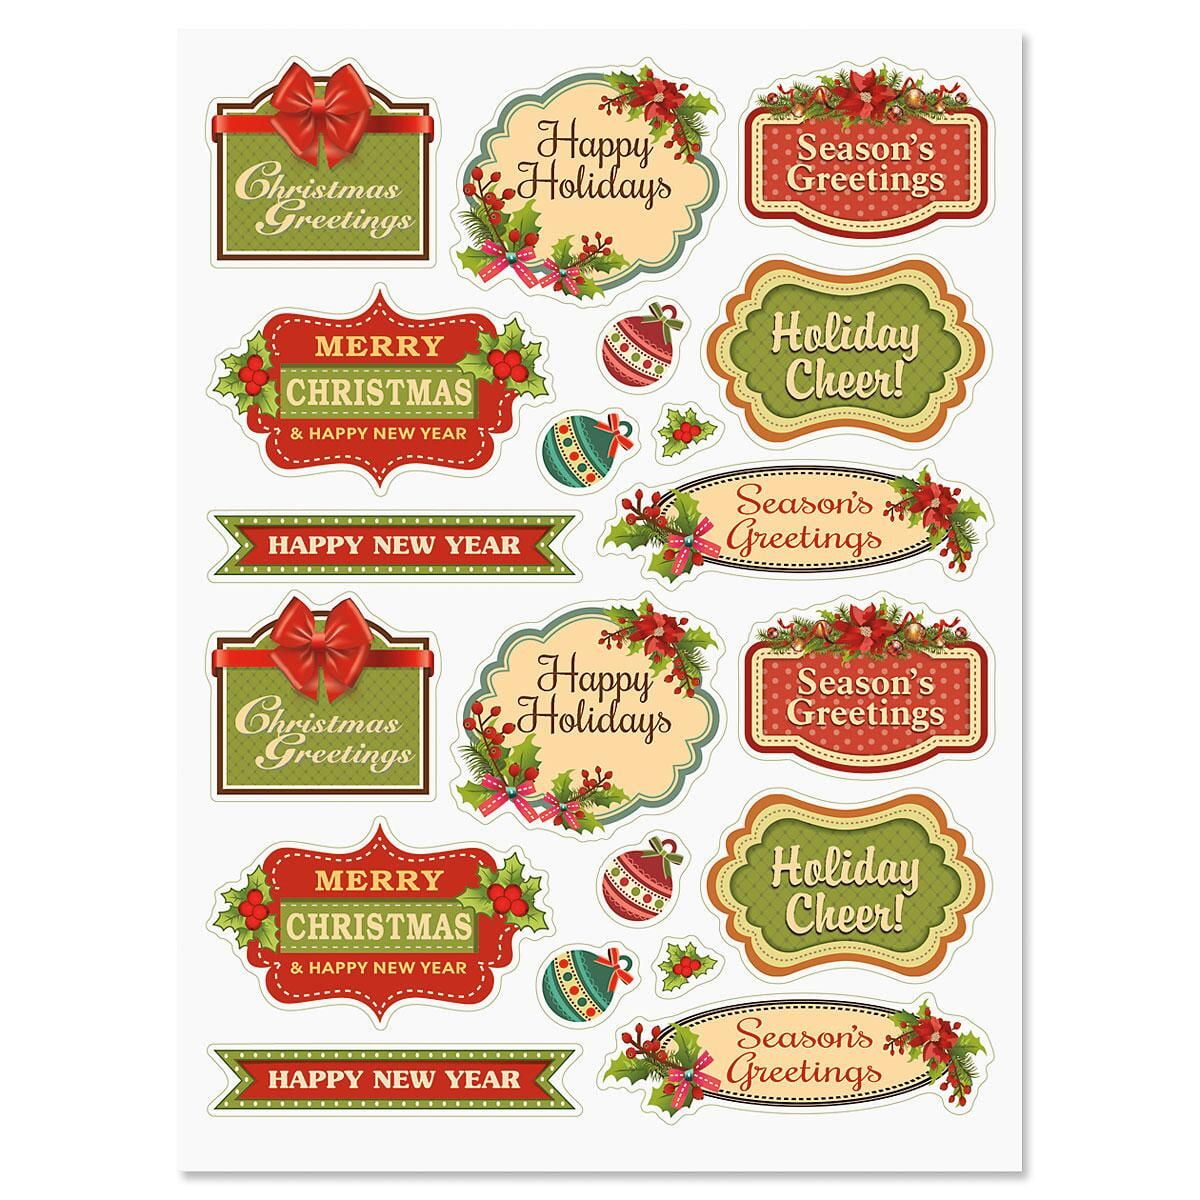 Vintage Christmas Florals - 2 sheets (44 stickers total) 